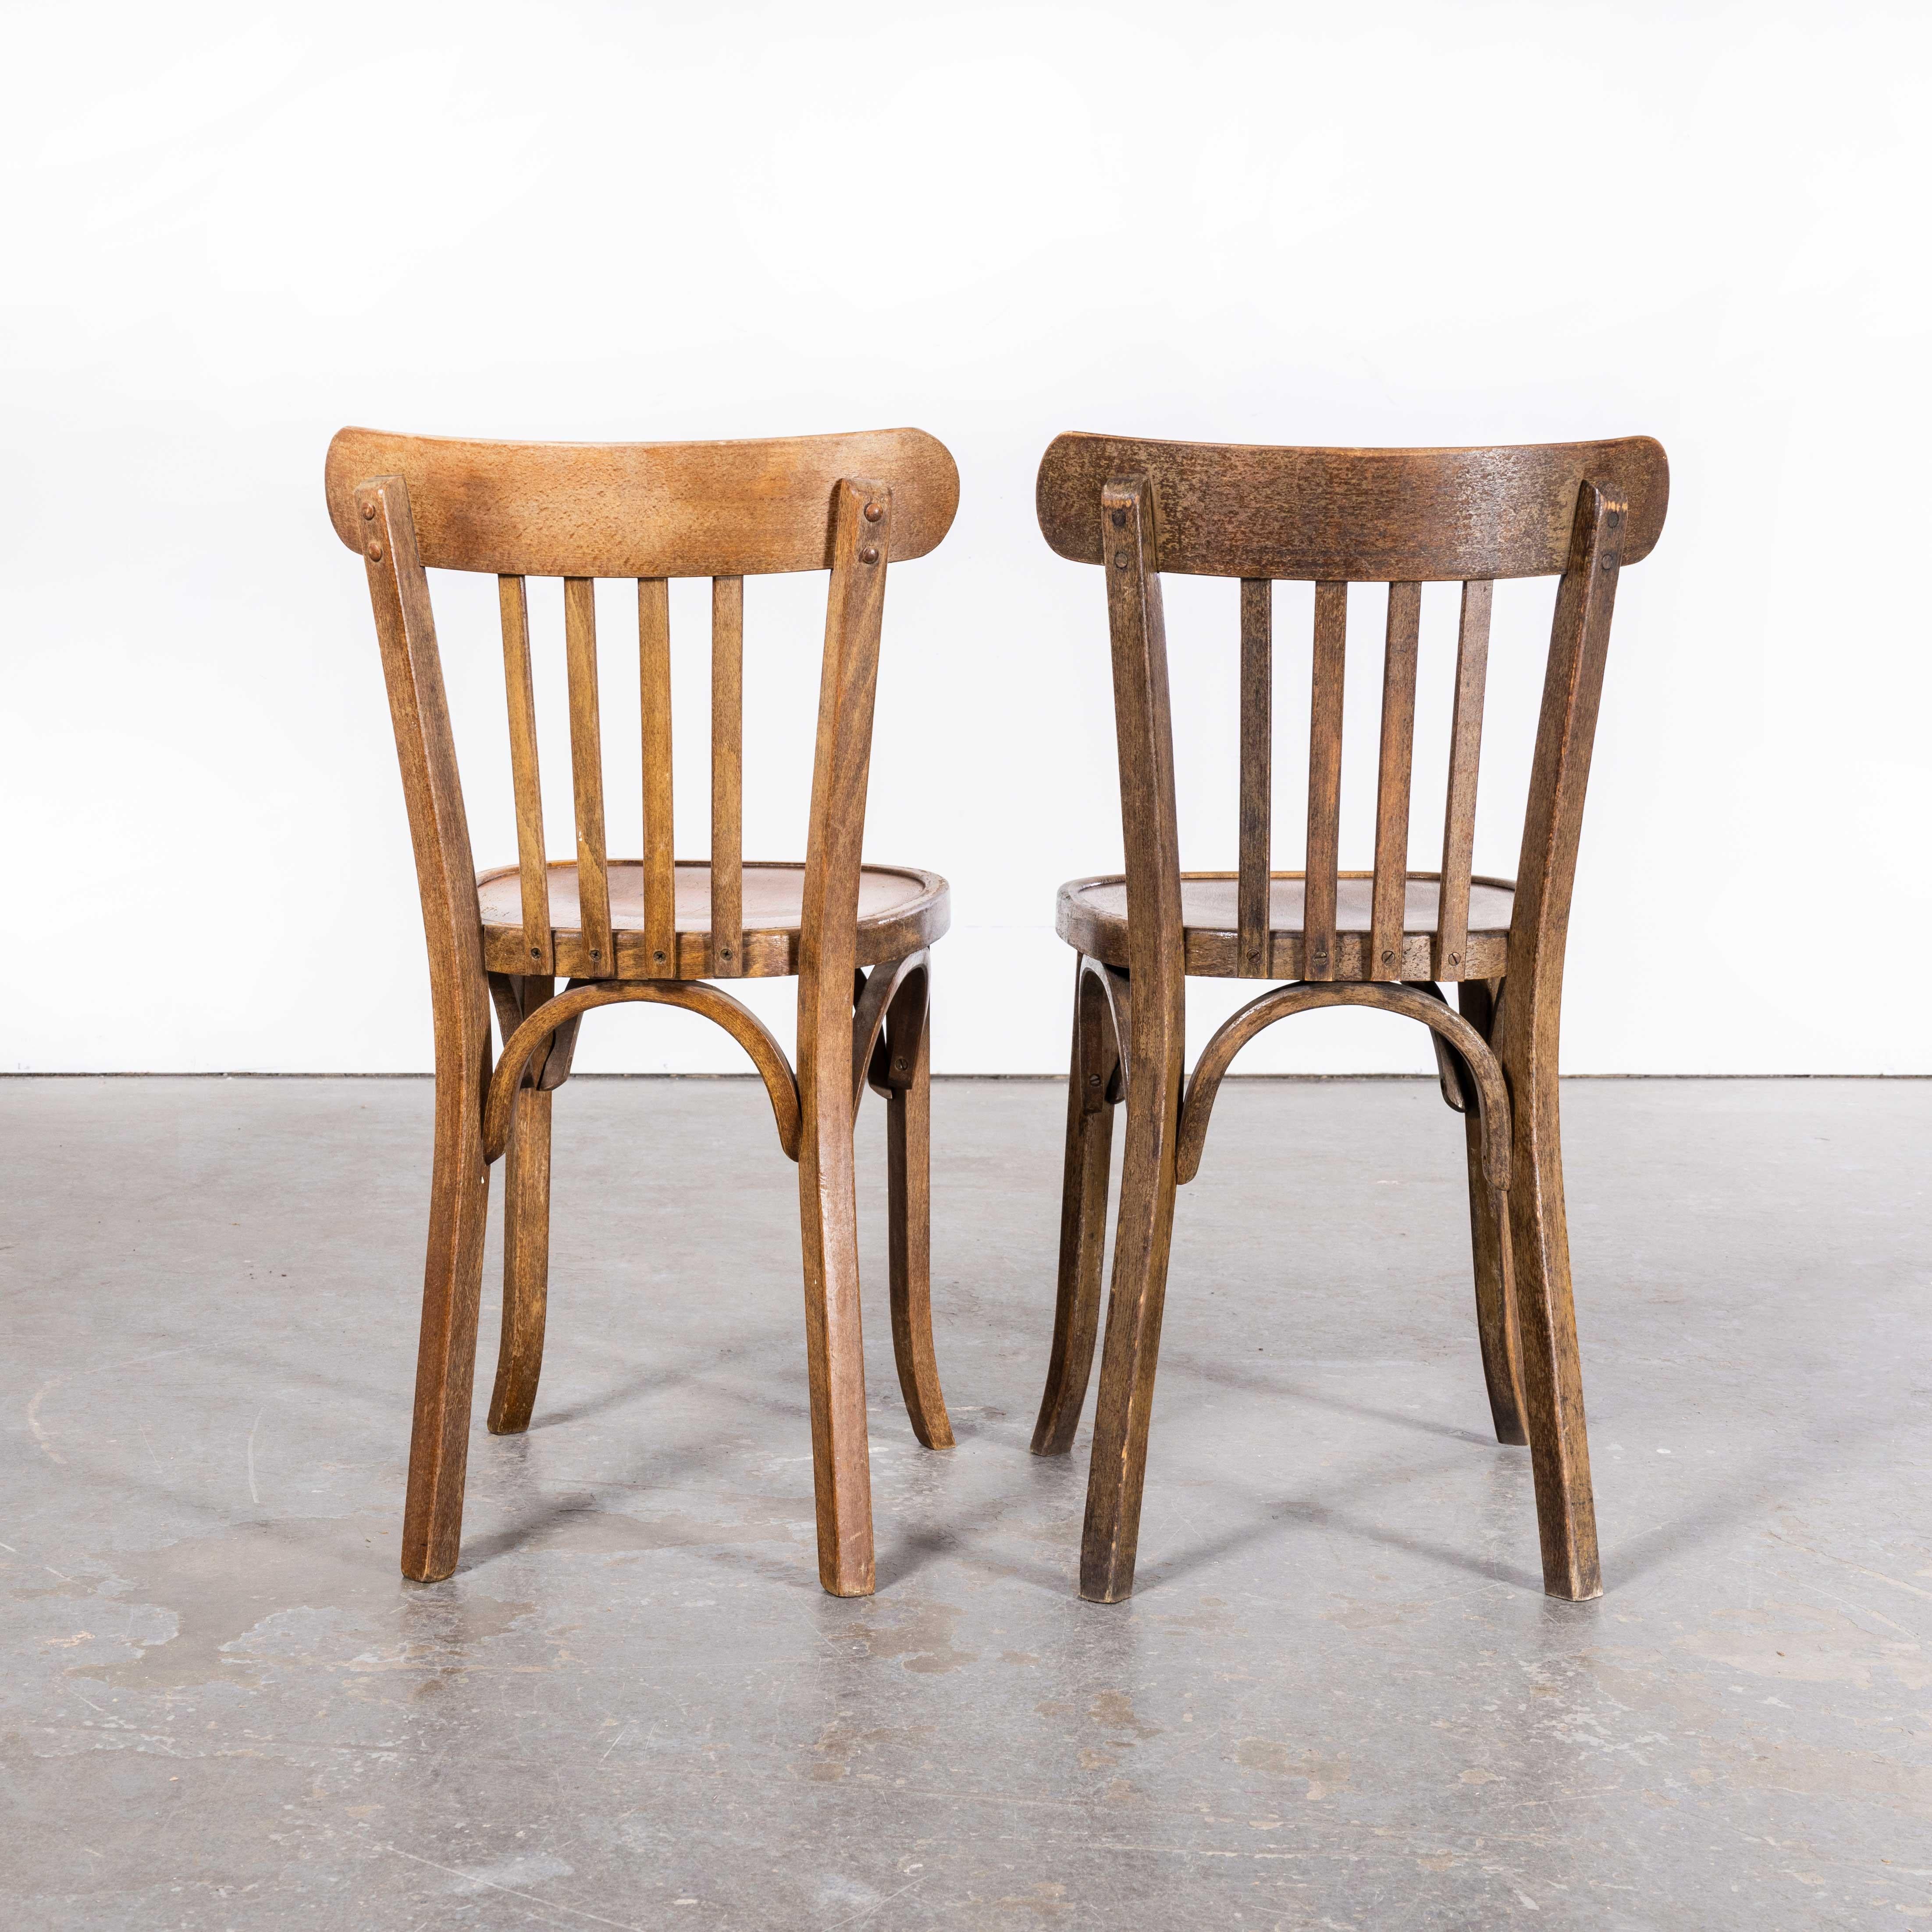 1950s Luterma Mid Oak Bentwood Dining Chair – Pair
1950s Luterma Mid Oak Bentwood Dining Chair – Pair. The process of steam bending beech to create elegant chairs was discovered and developed by Thonet, but when its patents expired in 1869 many